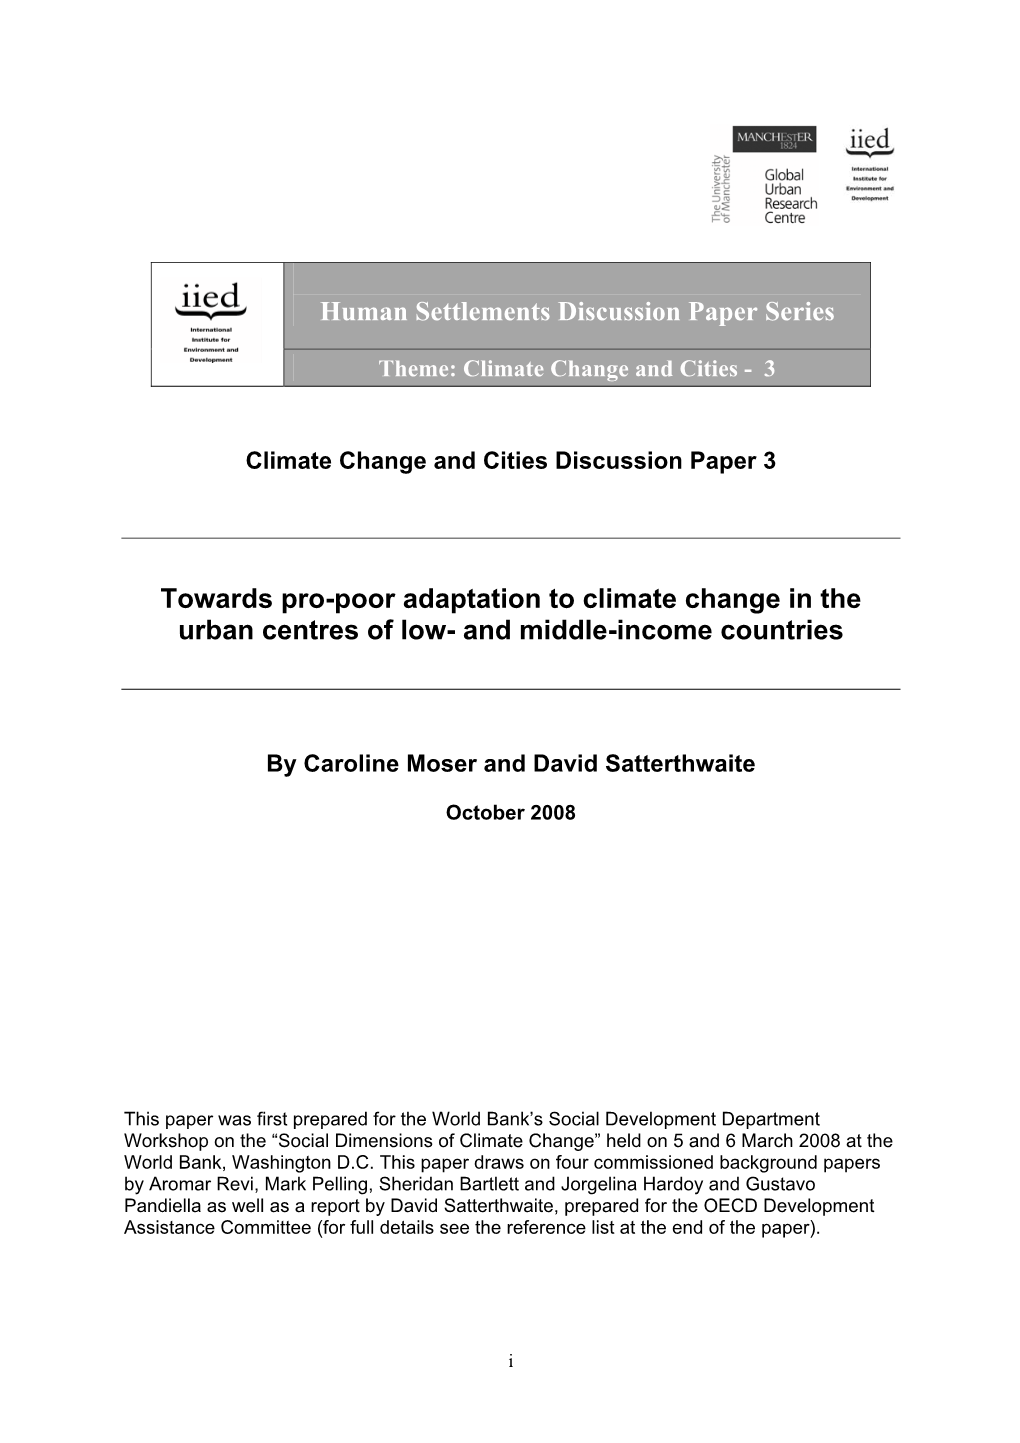 Towards Pro-Poor Adaptation to Climate Change in the Urban Centres of Low- and Middle-Income Countries